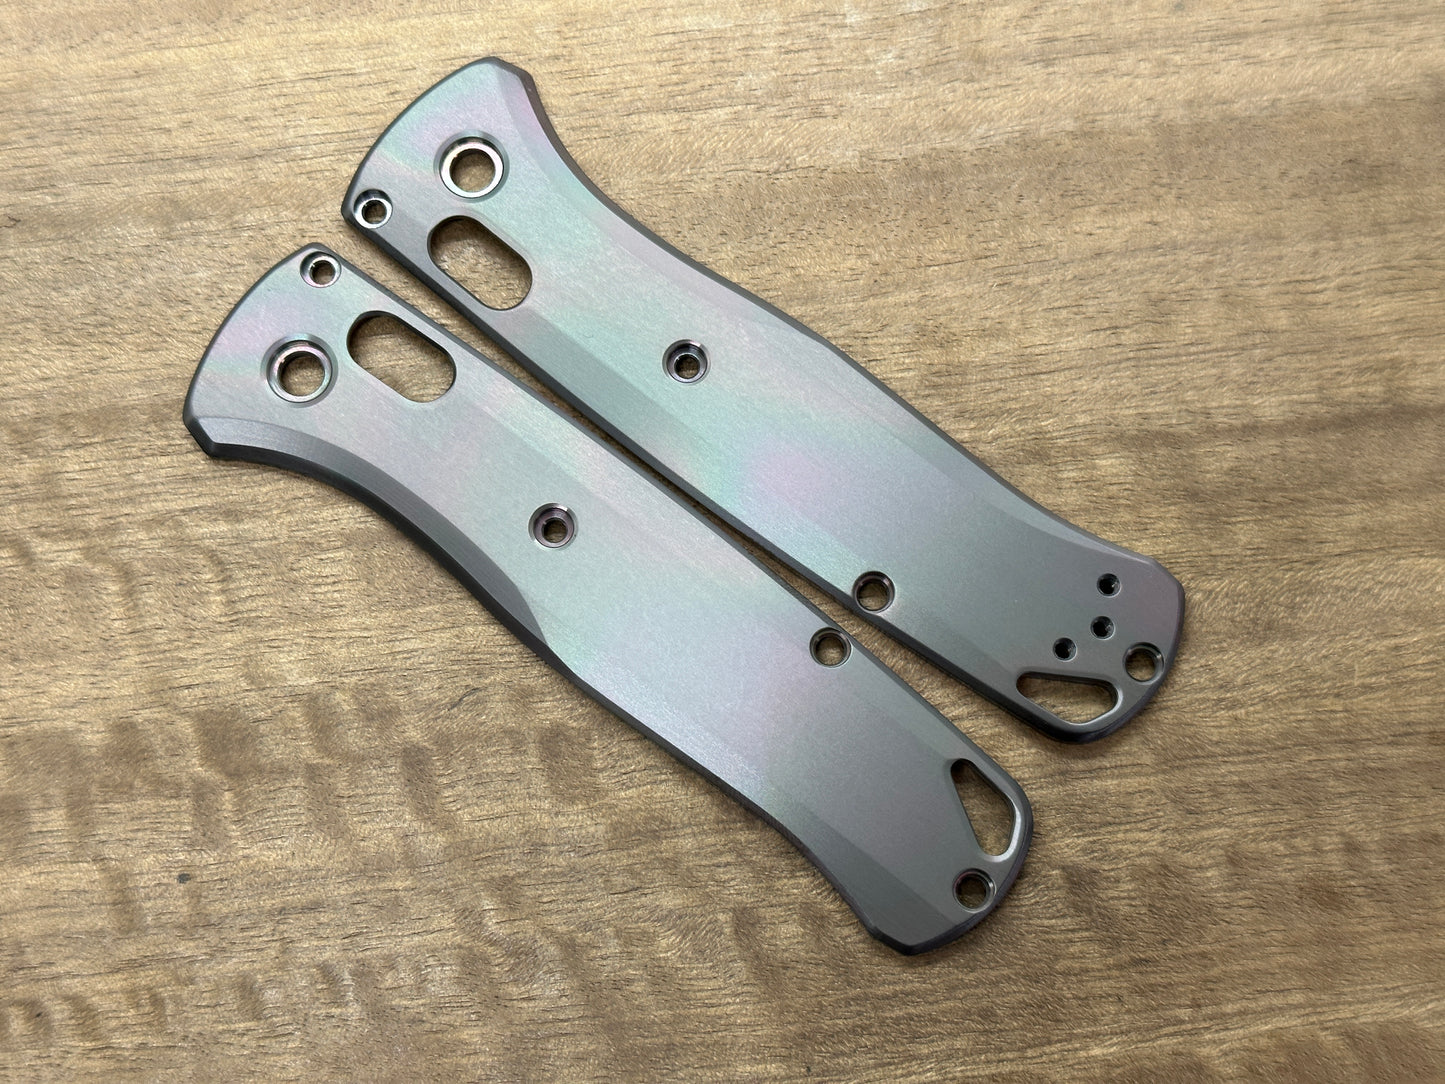 OIL SLICK Brushed Zirconium Scales for Benchmade Bugout 535